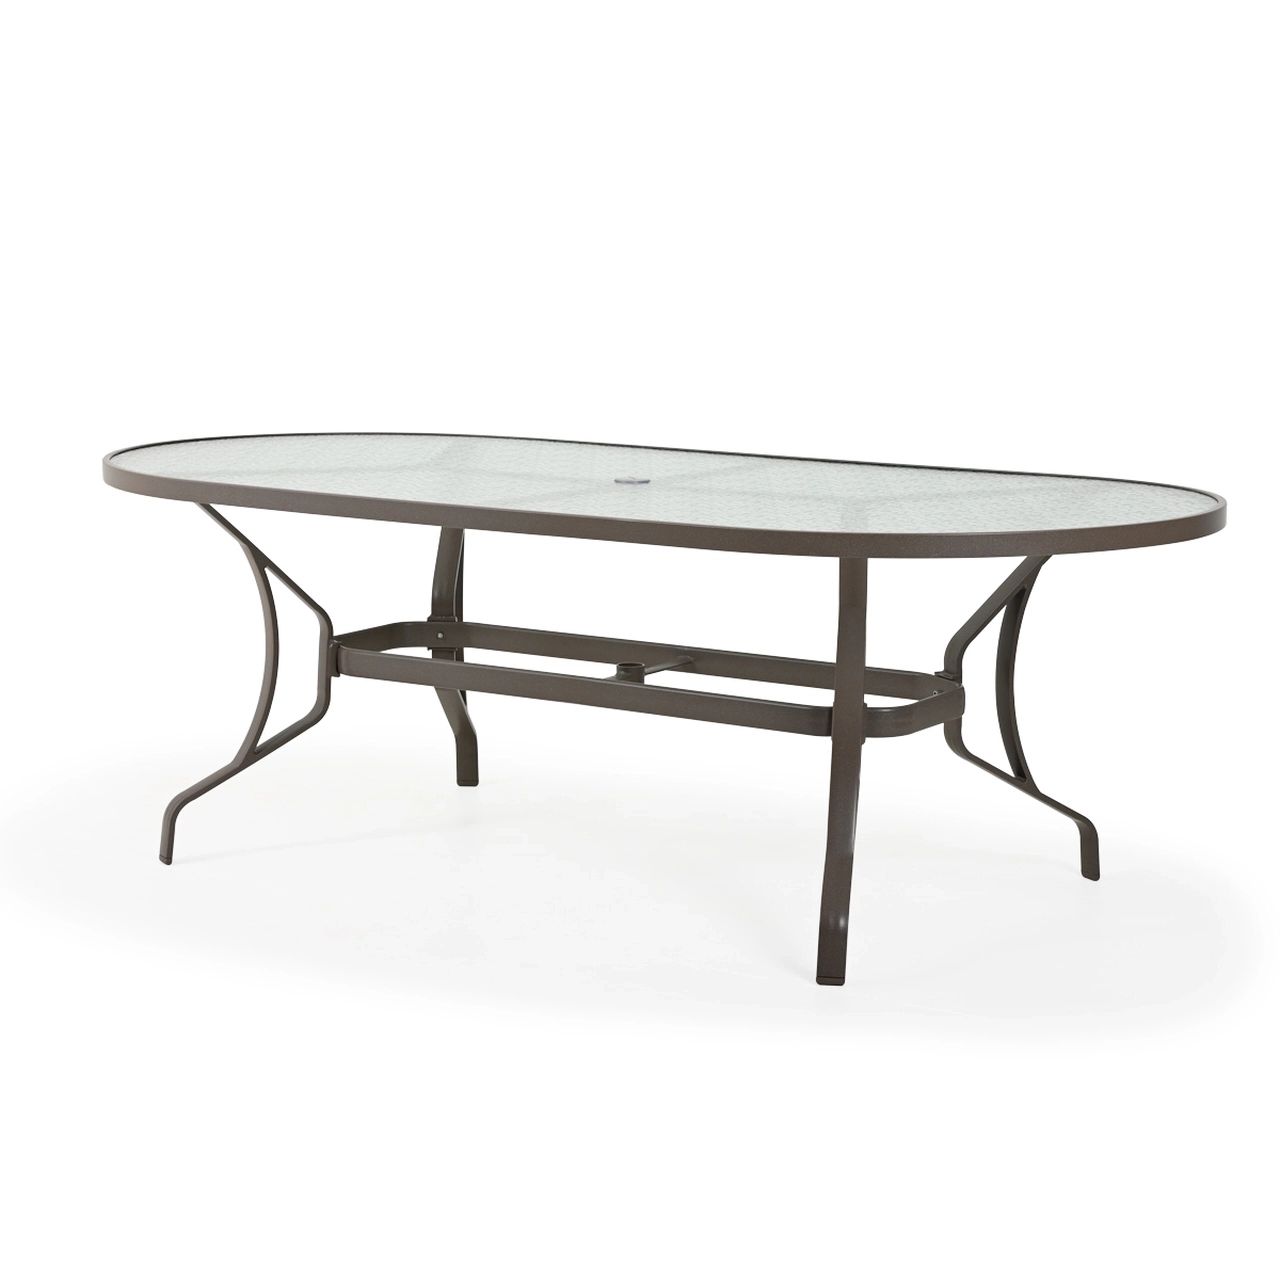 Trendy Glass Oval Outdoor Tables Intended For Big Lake Outdoor 84" X 42" Oval Glass Top Dining Table (View 5 of 15)